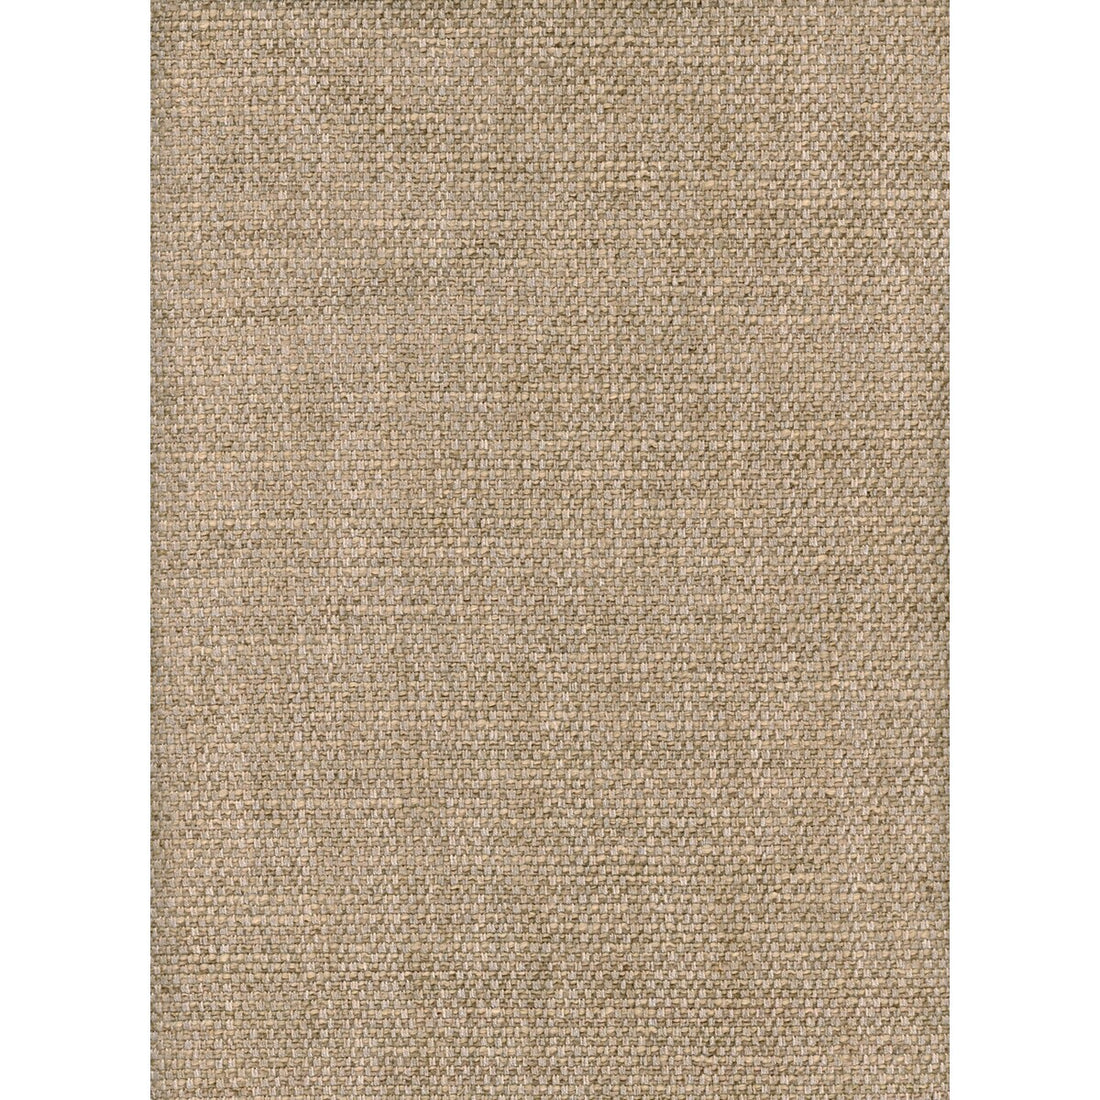 Paraggi fabric in wheat color - pattern AM100299.106.0 - by Kravet Couture in the Andrew Martin Portofino collection